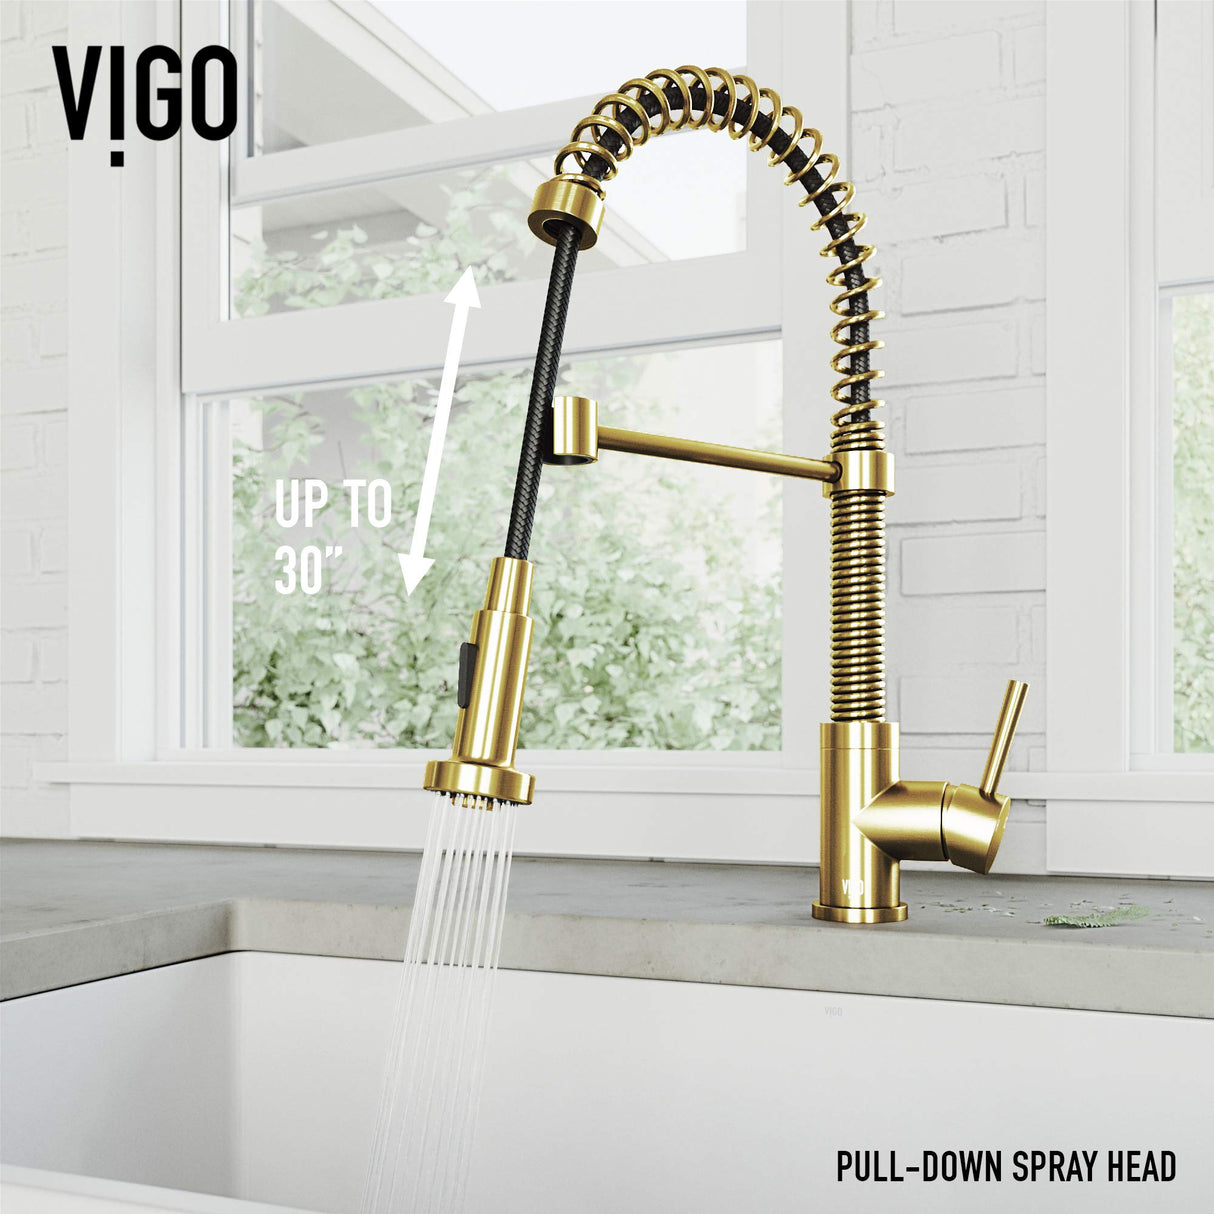 Edison Single Handle Pull-Down Sprayer Kitchen Faucet in Matte Brushed Gold